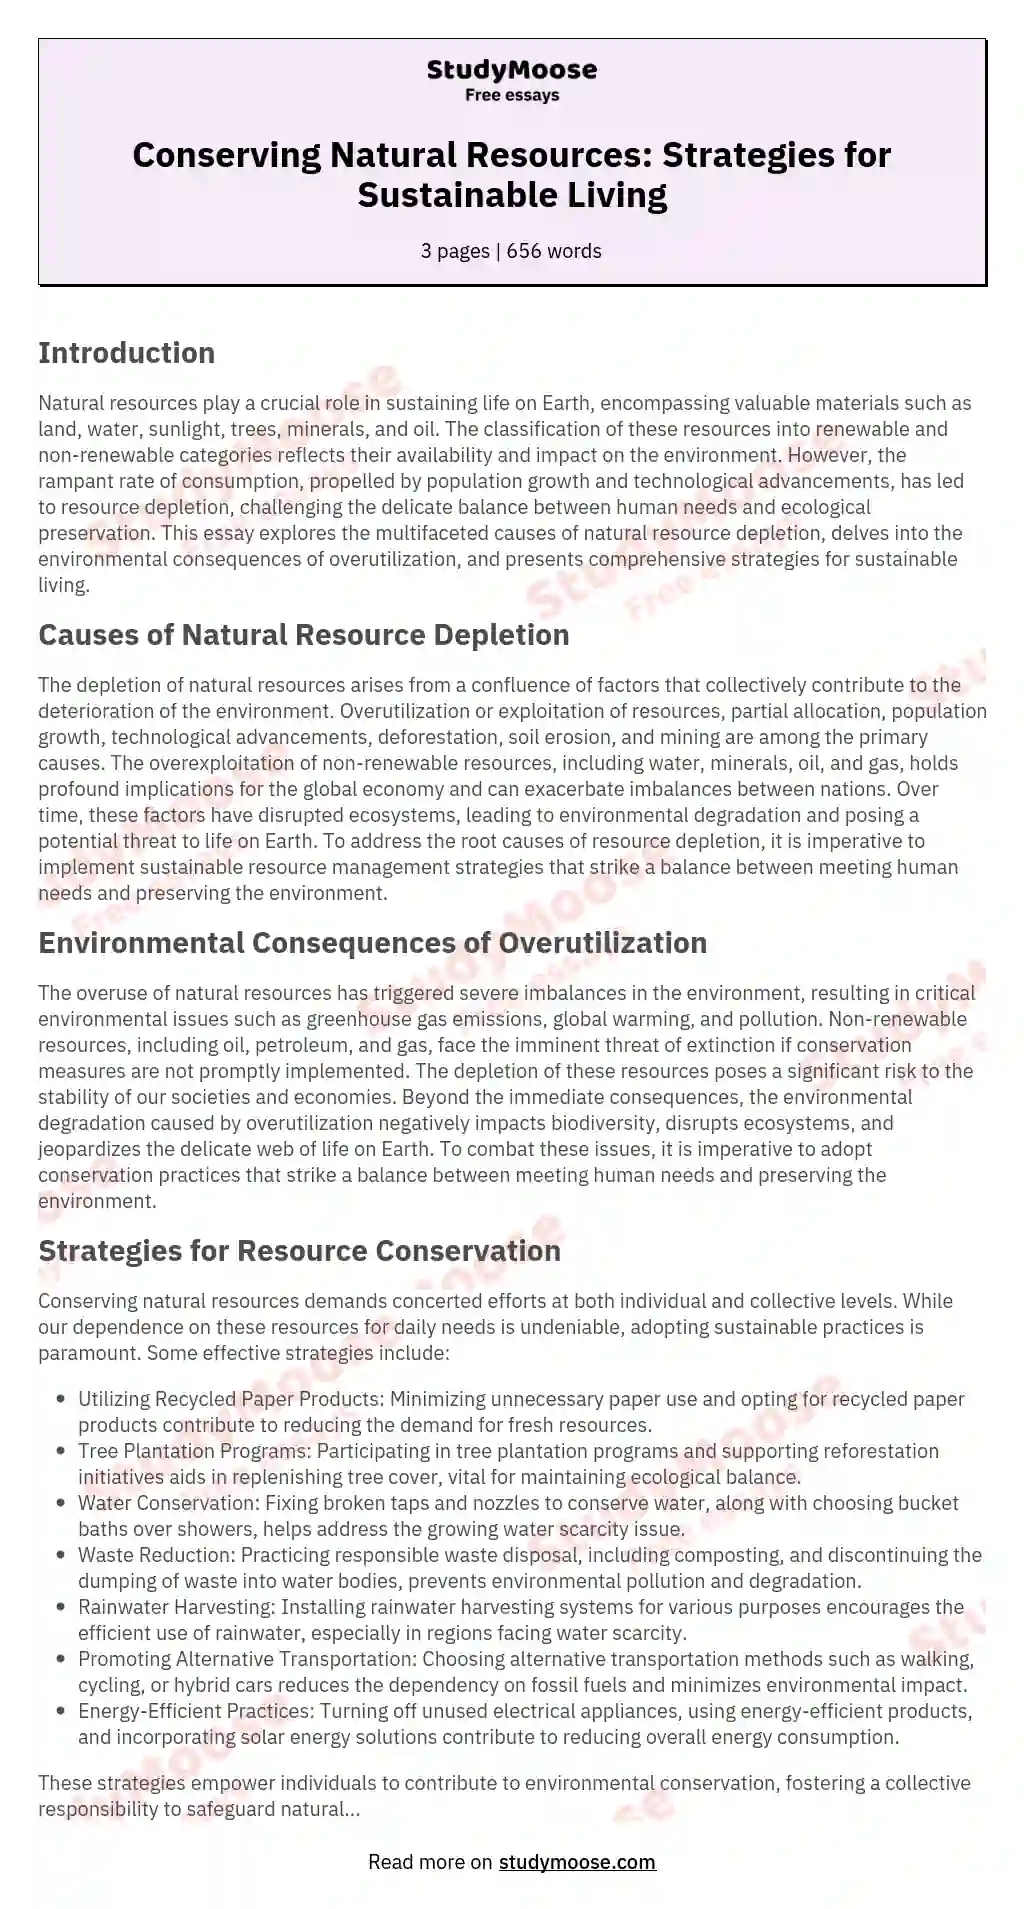 Conserving Natural Resources: Strategies for Sustainable Living essay